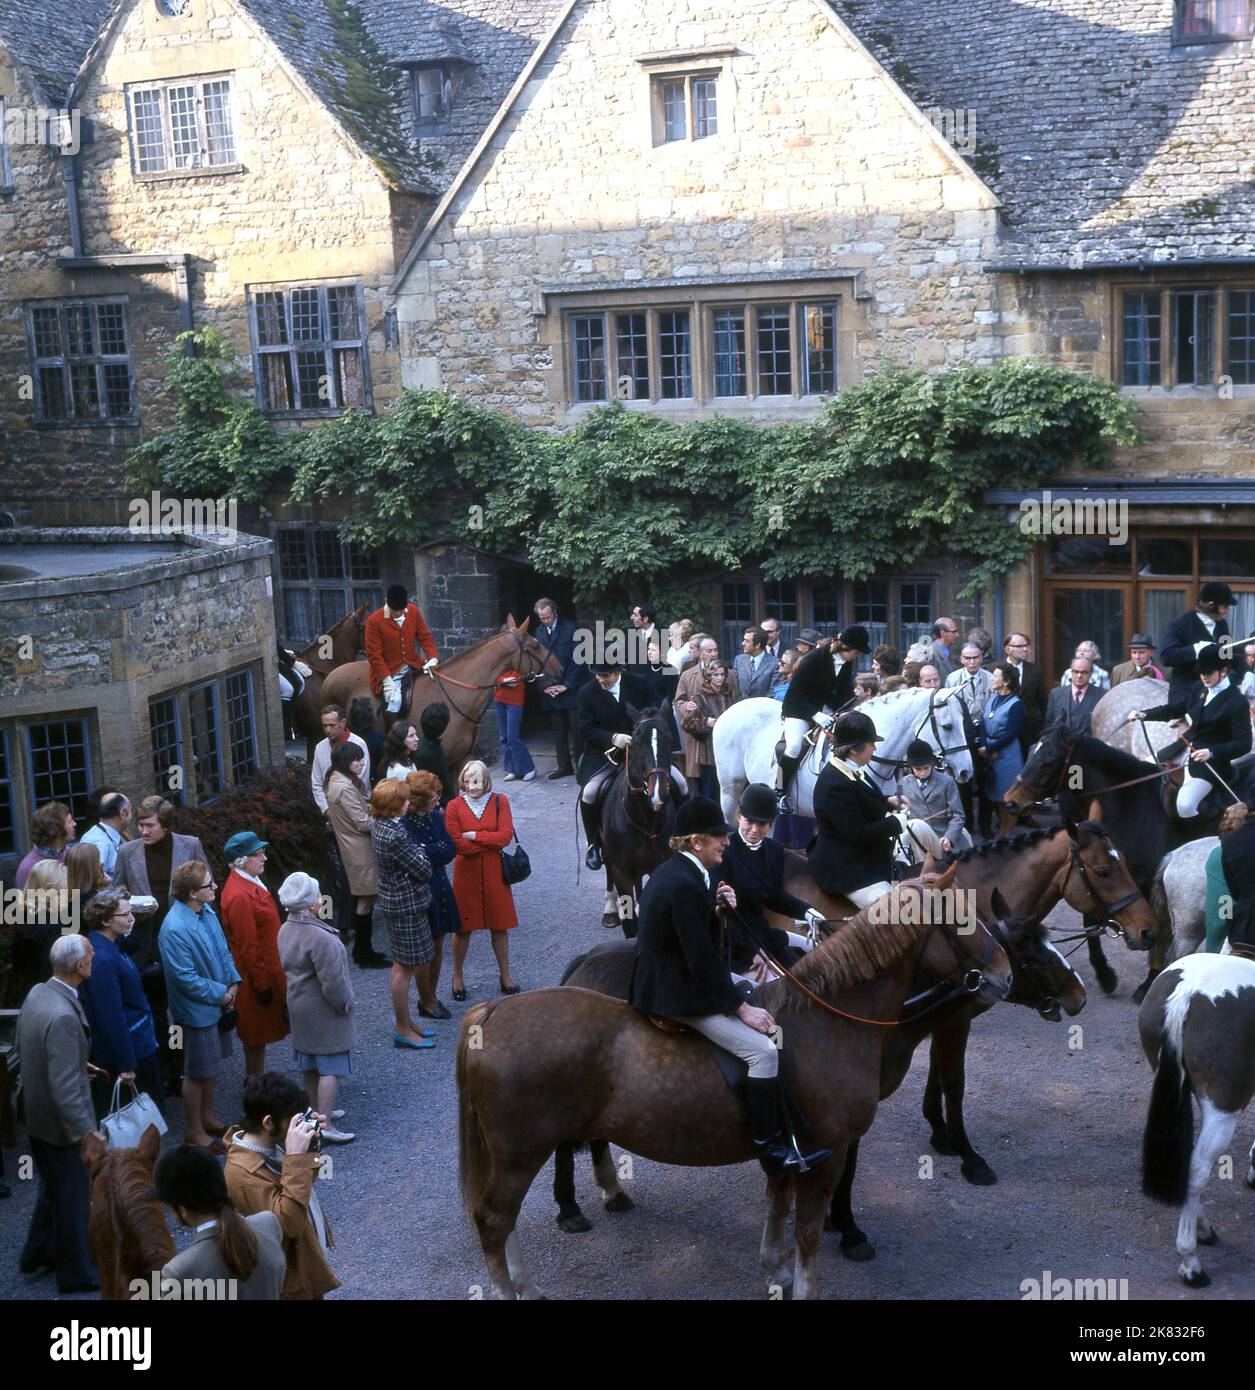 1960s, historical, dressed in their tunics anf breeches, members of the local fox hunt on their horses gathered in the village before the hunt, Cotswolds, England, UK. Stock Photo